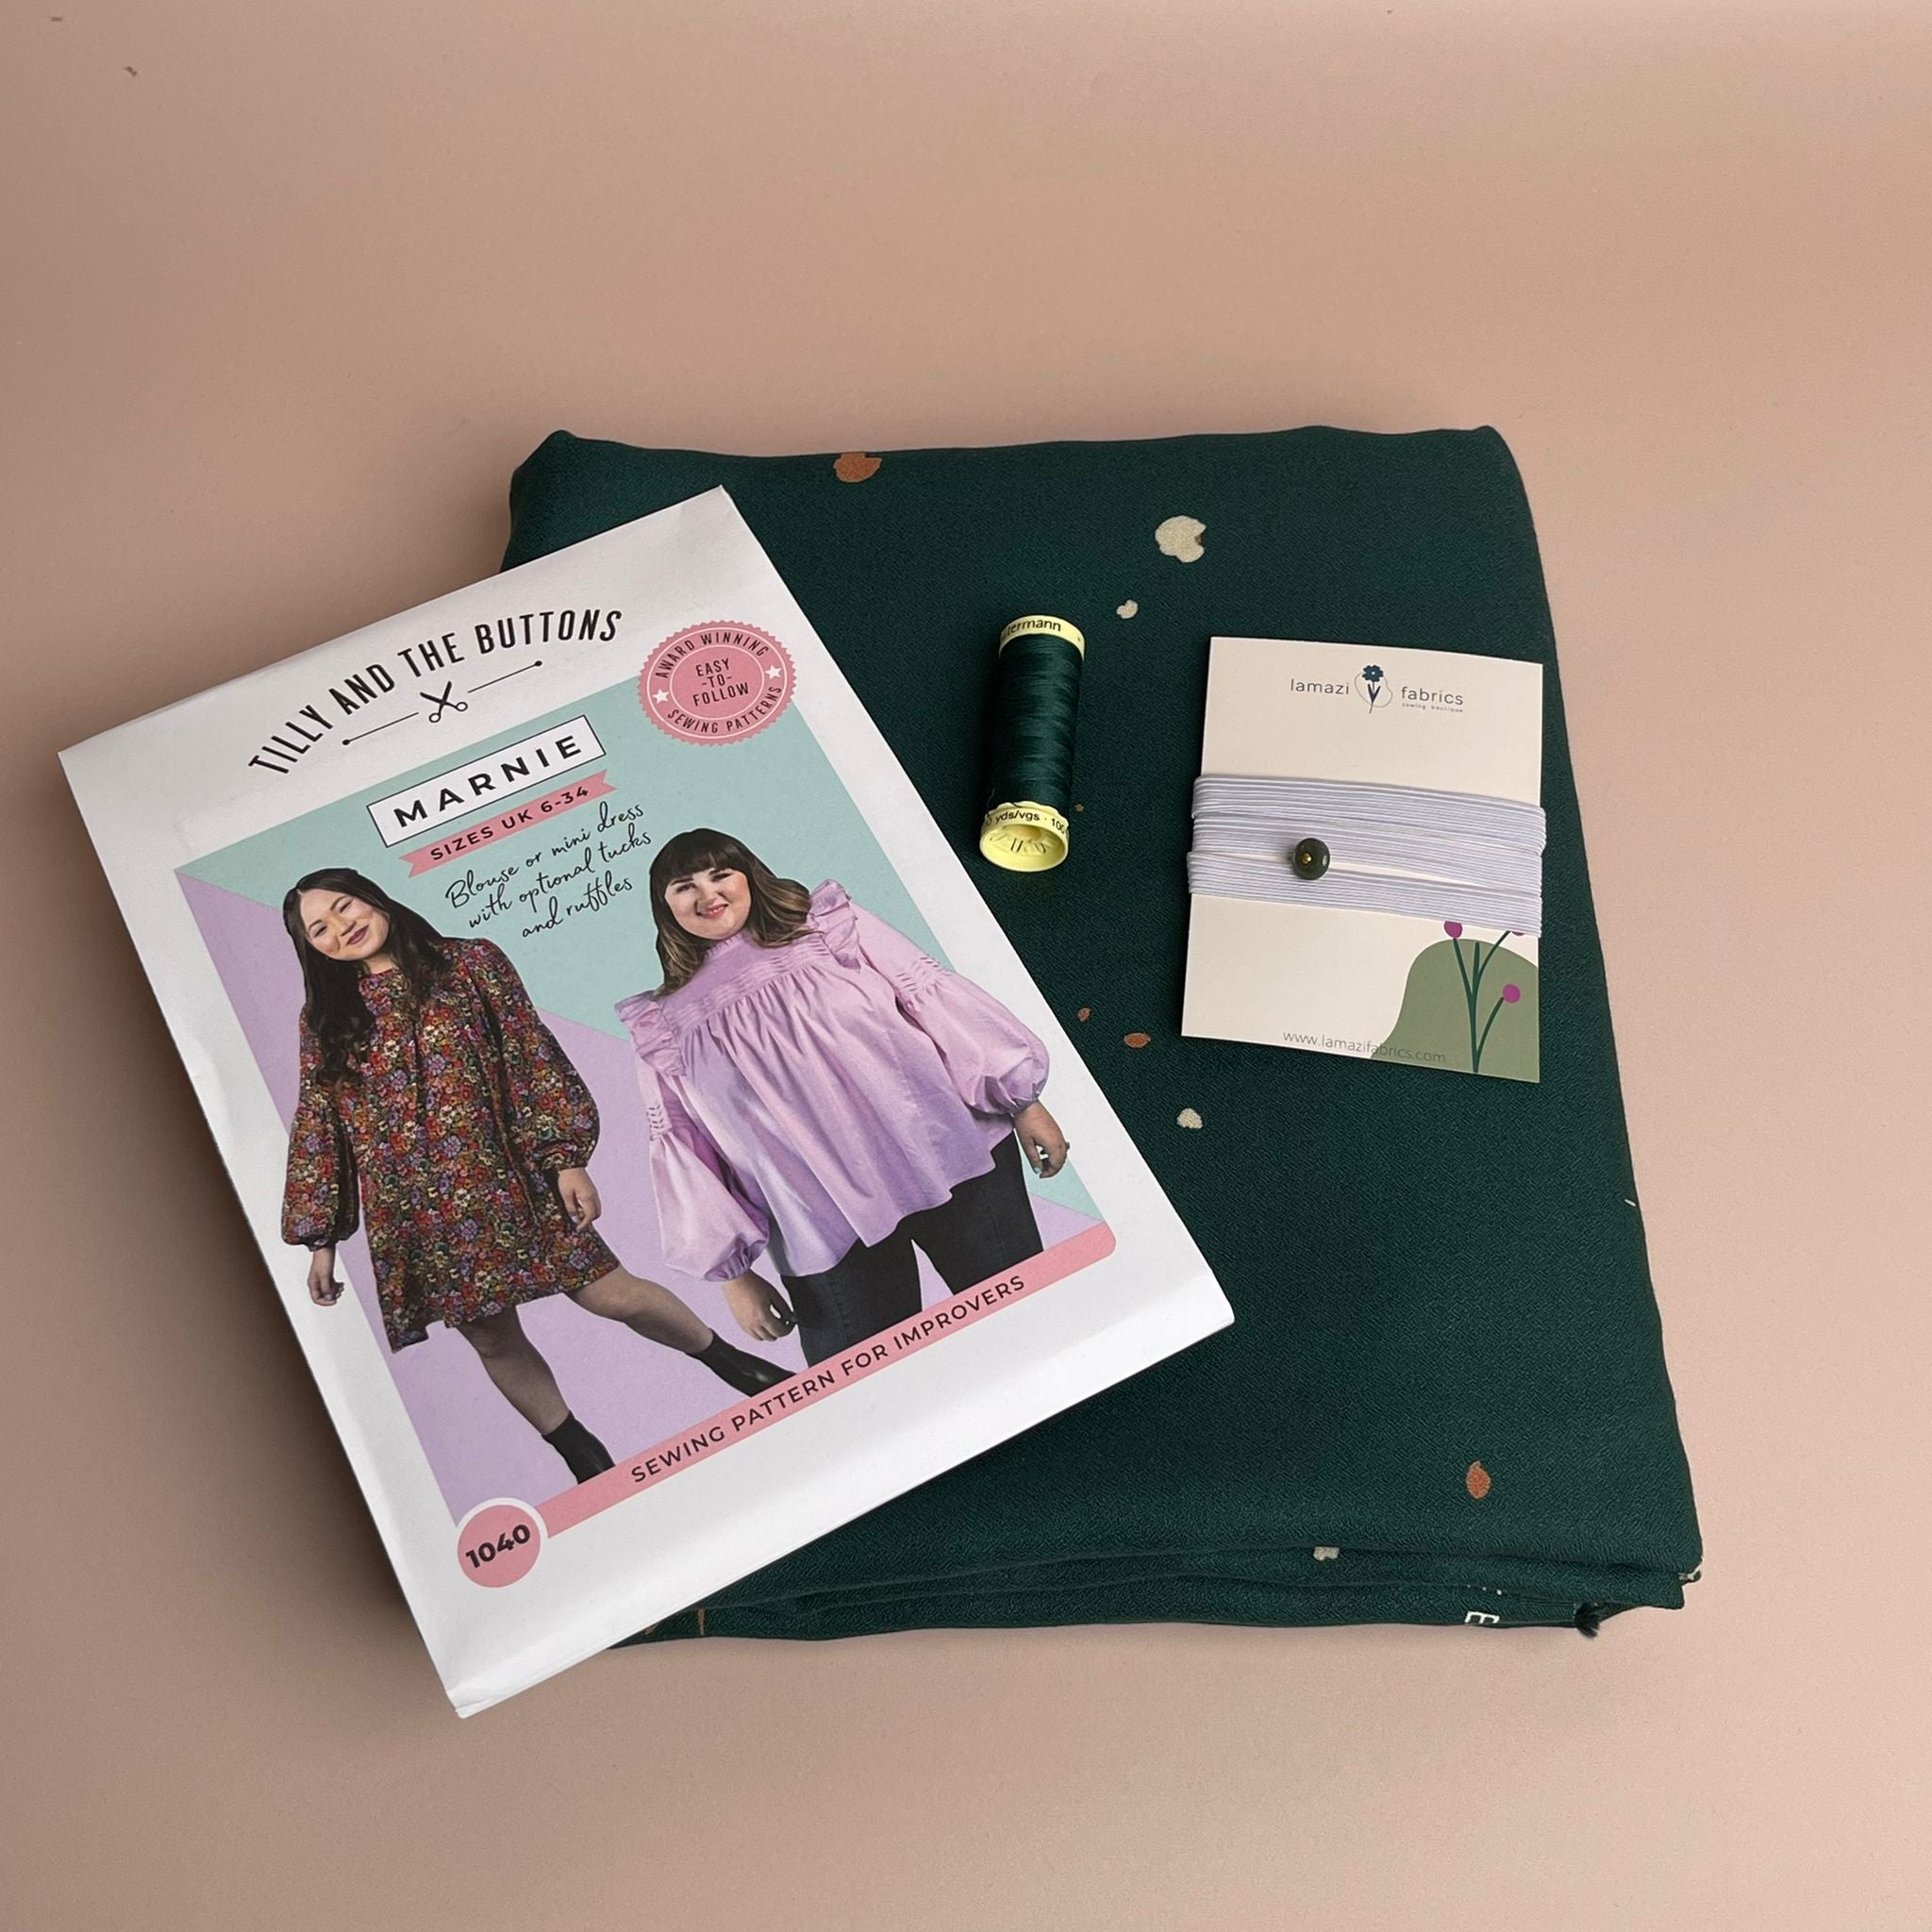 Sewing Kit - Marnie Blouse and Mini Dress in Windy Pine Green Viscose Crepe